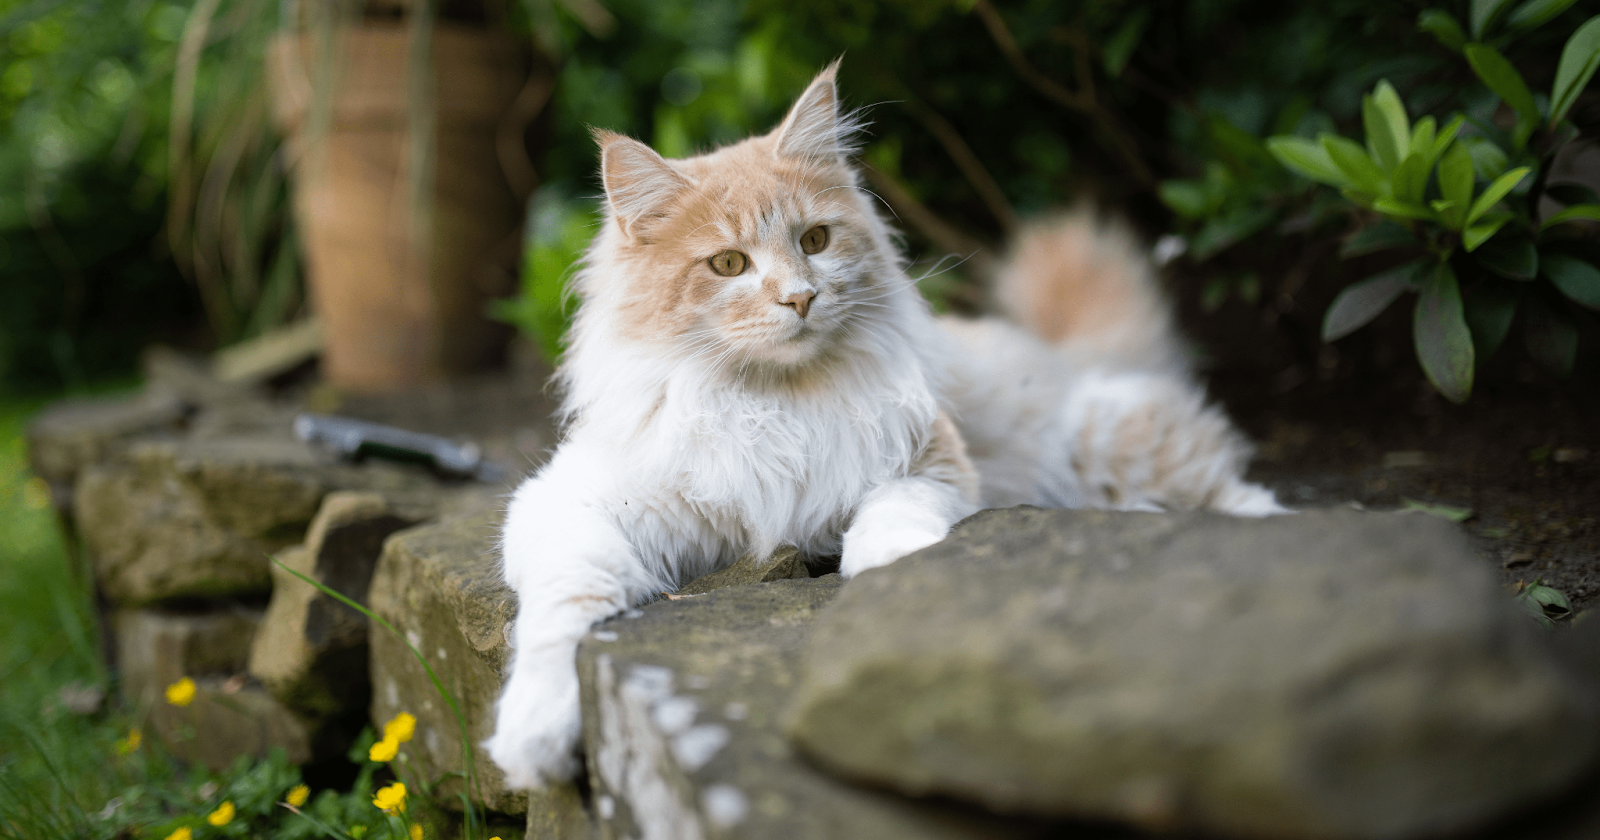 25 Fun Facts About Maine Coon Cats